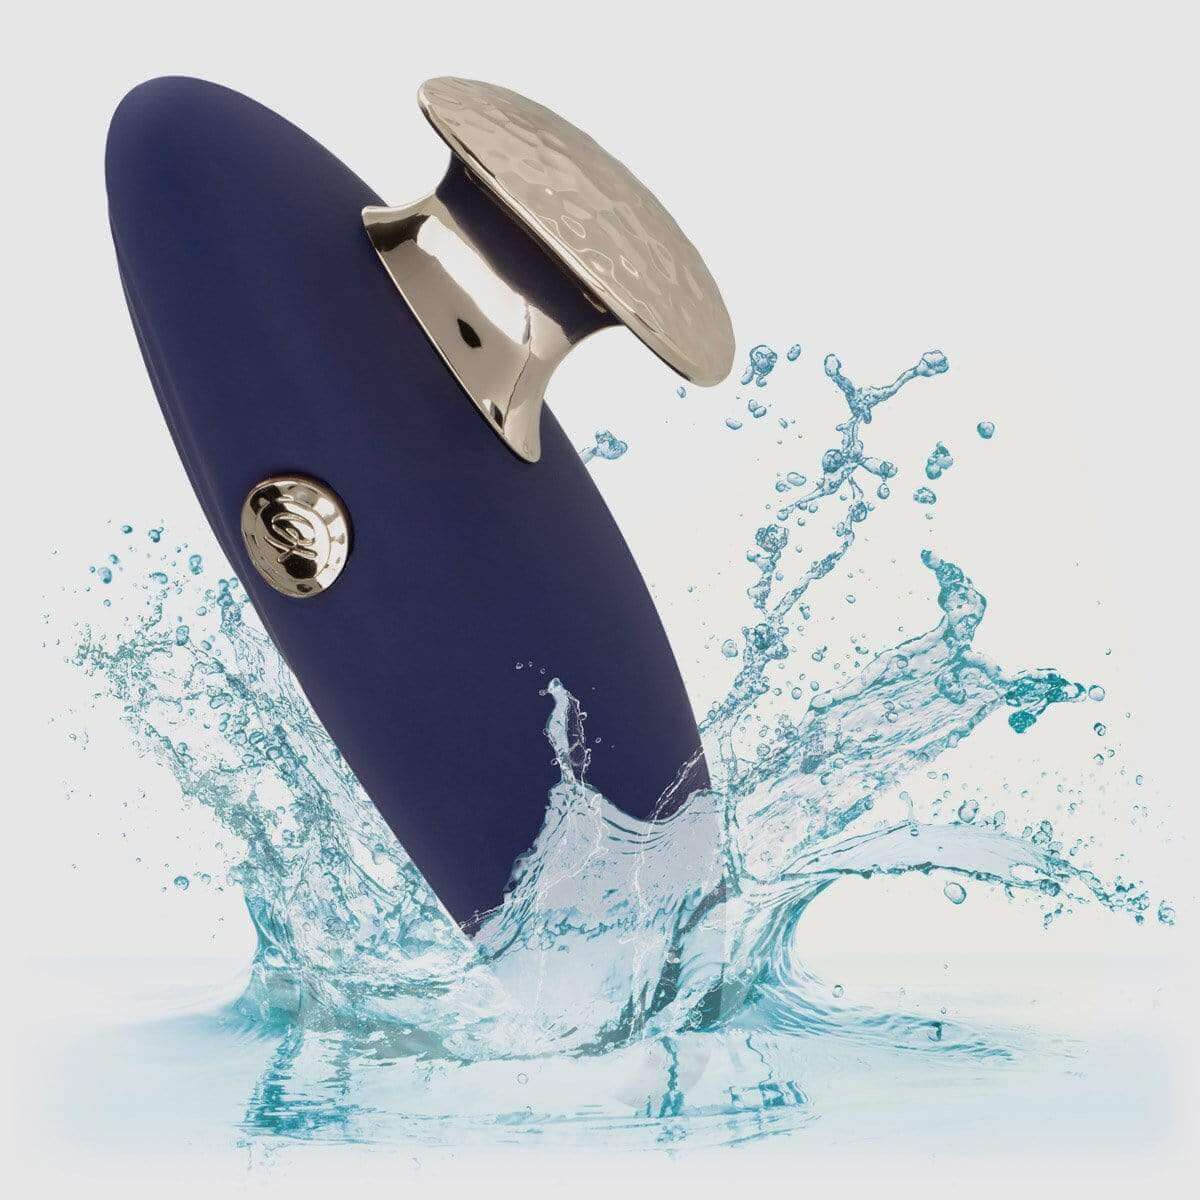 Chic Violet Finger Grip Vibrator - Thorn & Feather